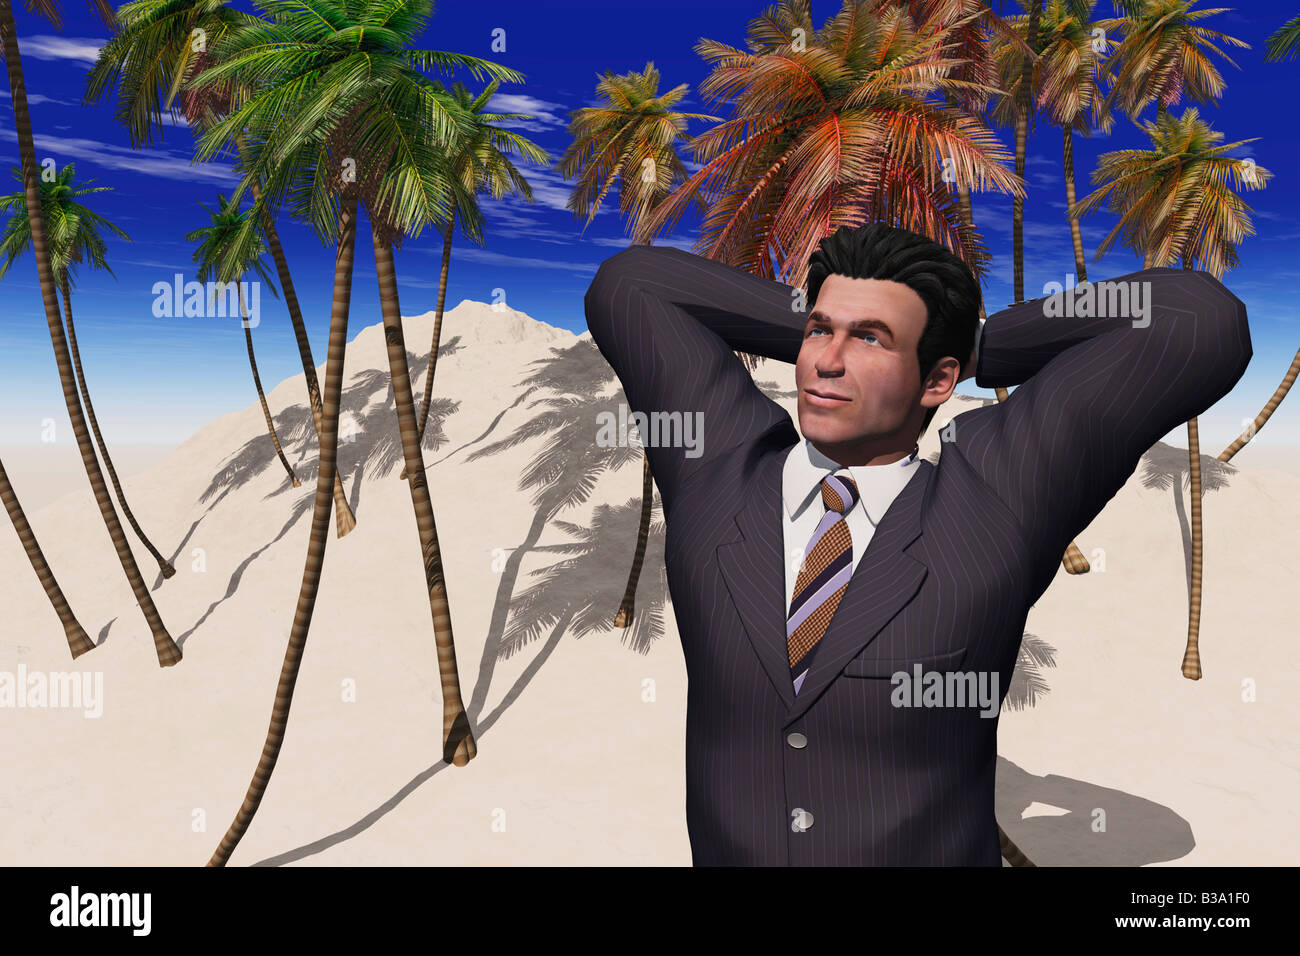 Computer Generated Image Of A Businessman On A Desert Island Stock Photo